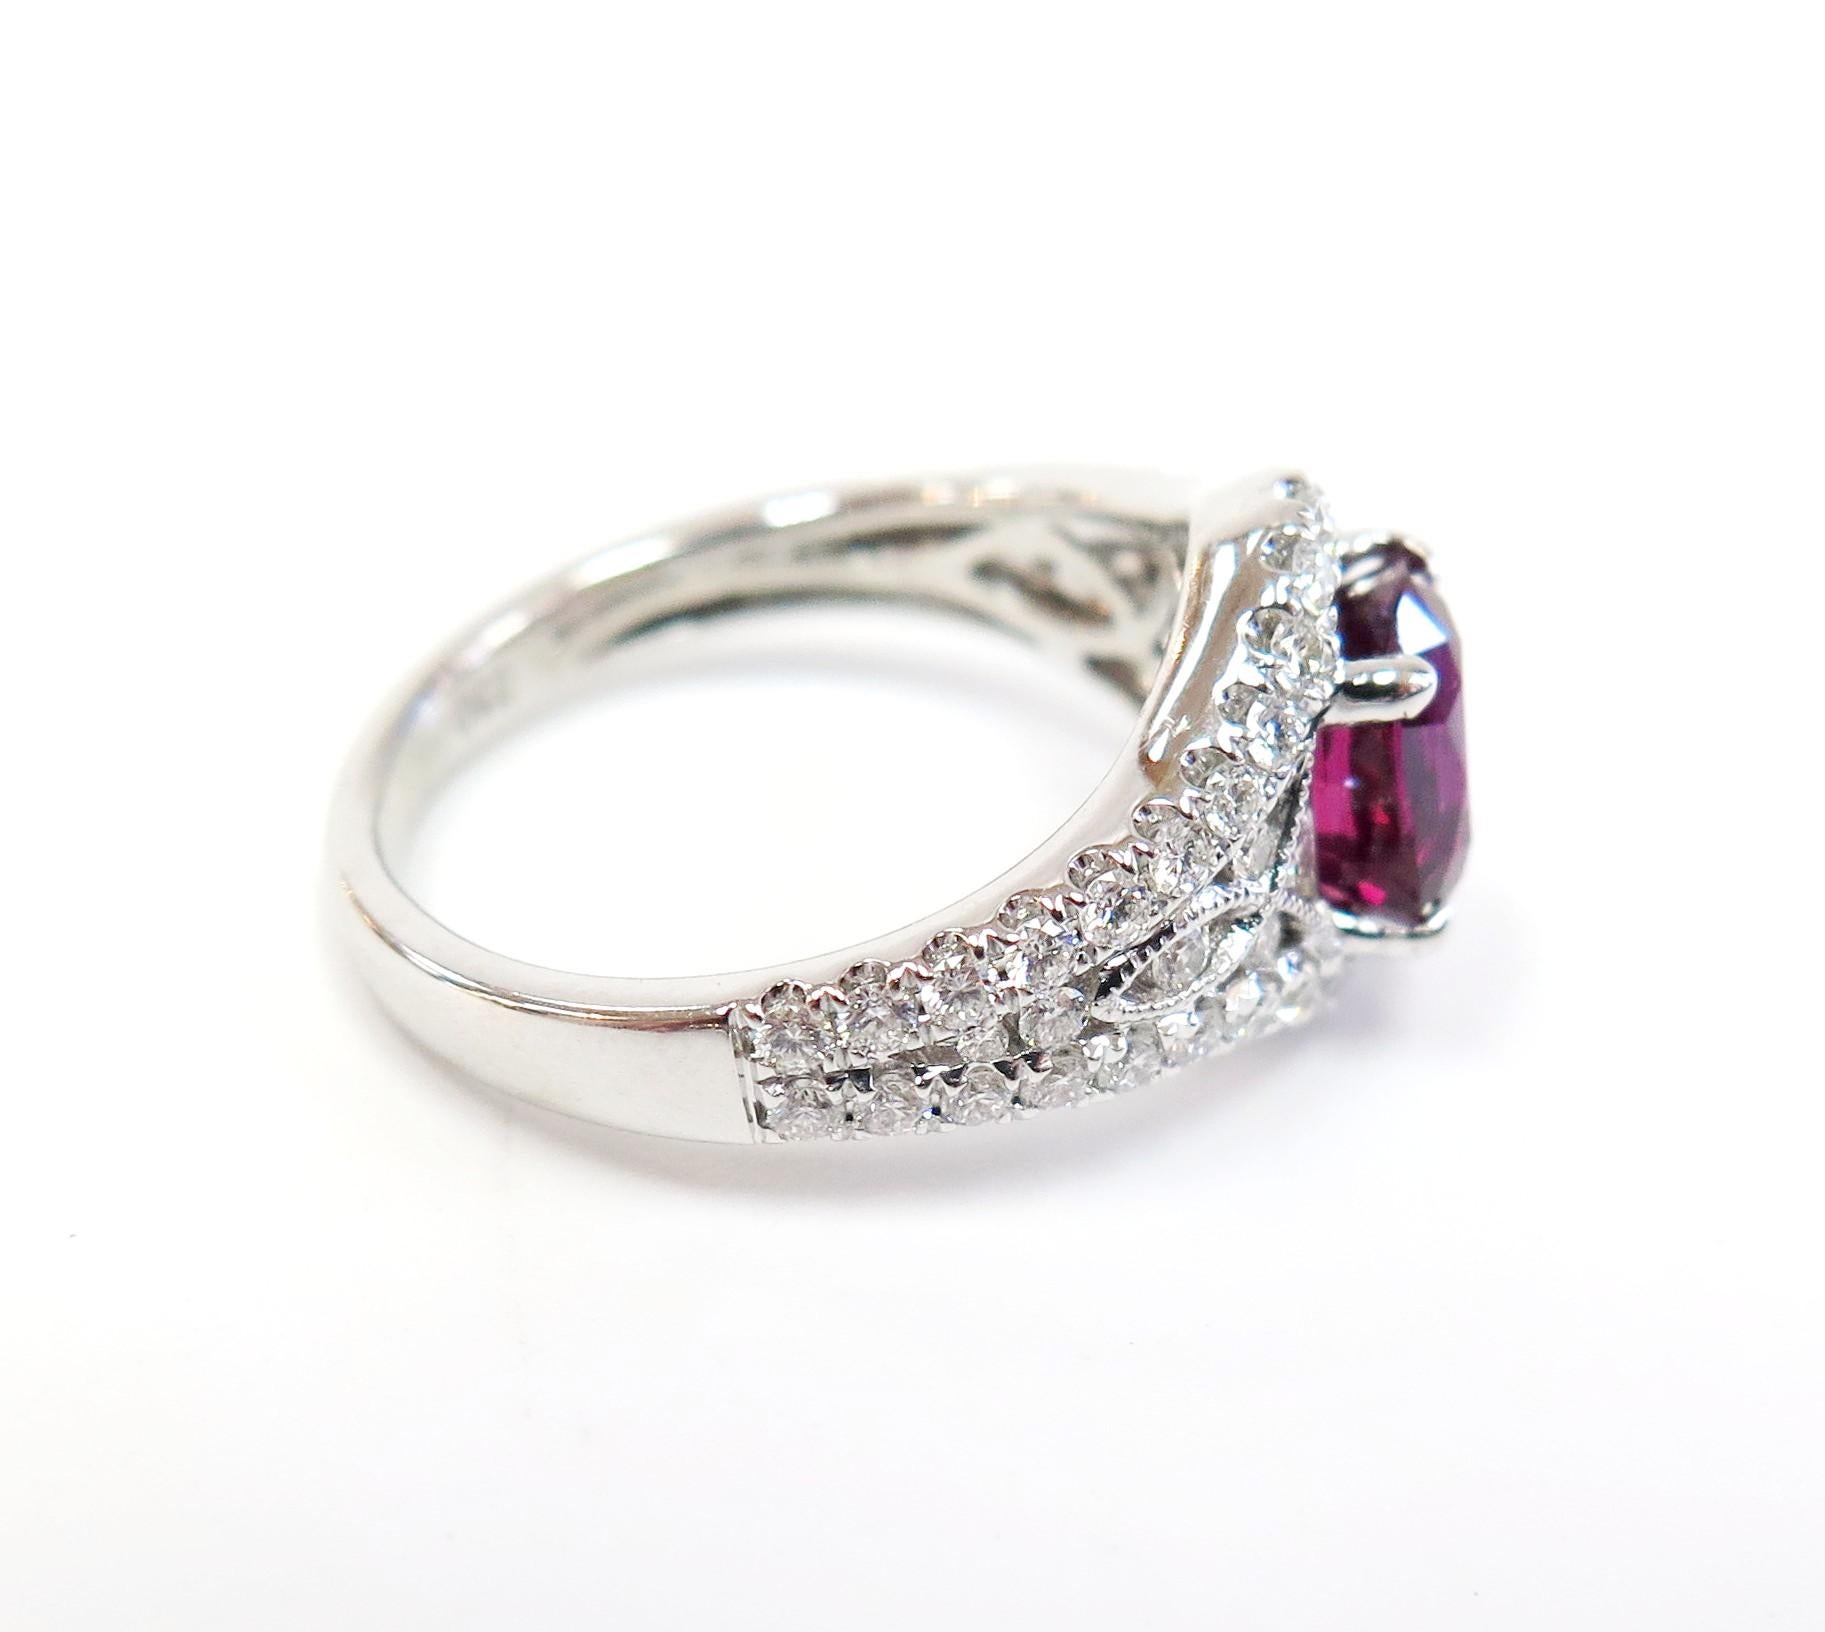 Rubies have often been seen as the gem of passion, love, and courage.
People born in July have this gem as their birthstone.
This vibrant oval ruby is surrounded by sparkling round brilliant diamonds in 18 karat white gold. 

Genuine Ruby: 1.05